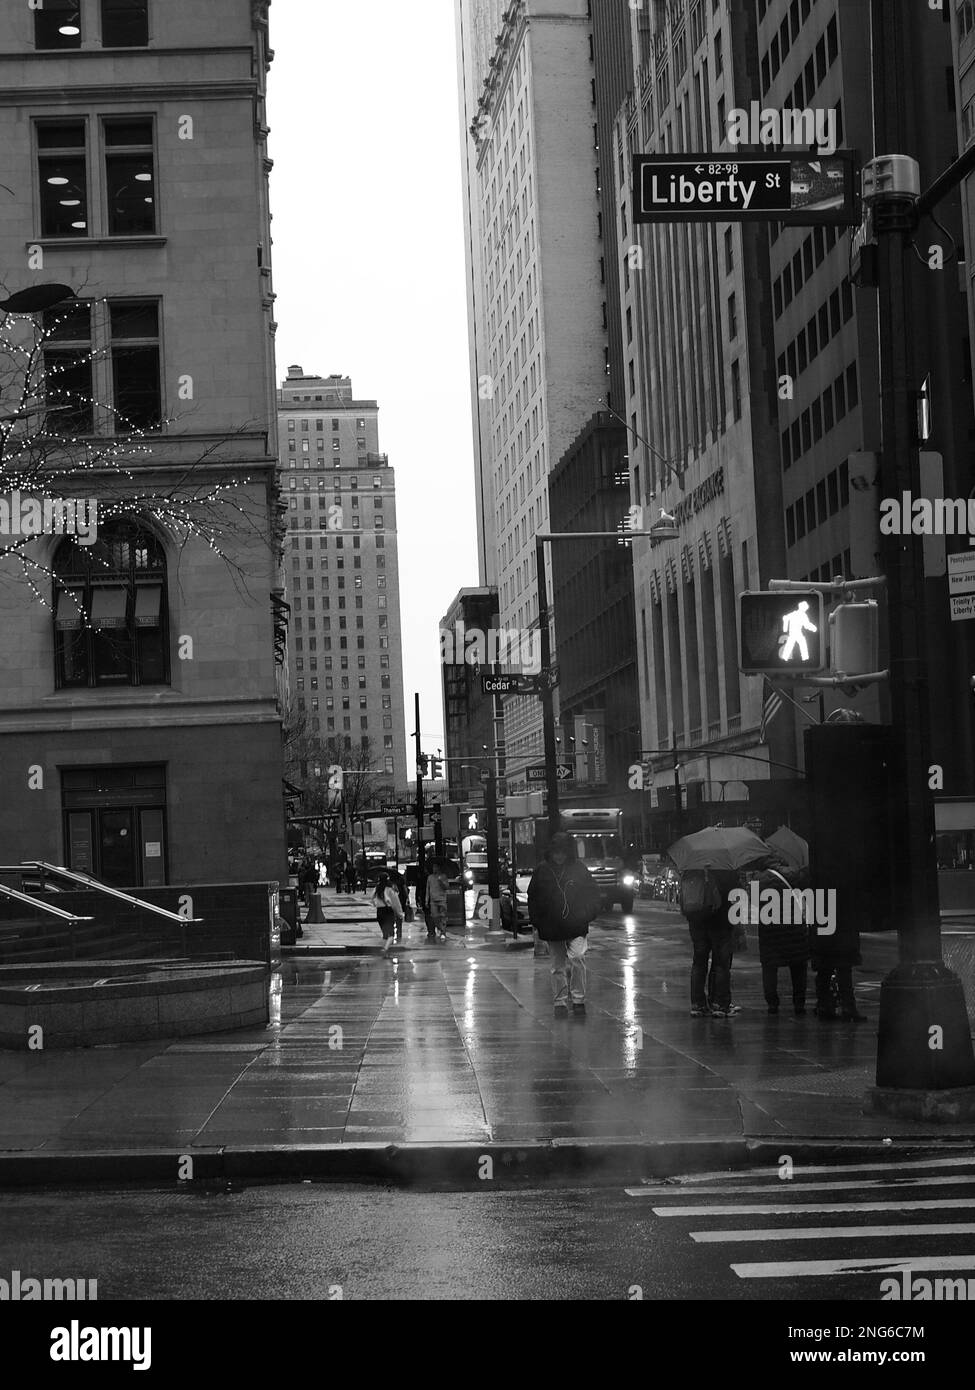 Street images of New York City in the rain and in black and white. Random images showing walkers in the rain. Stock Photo